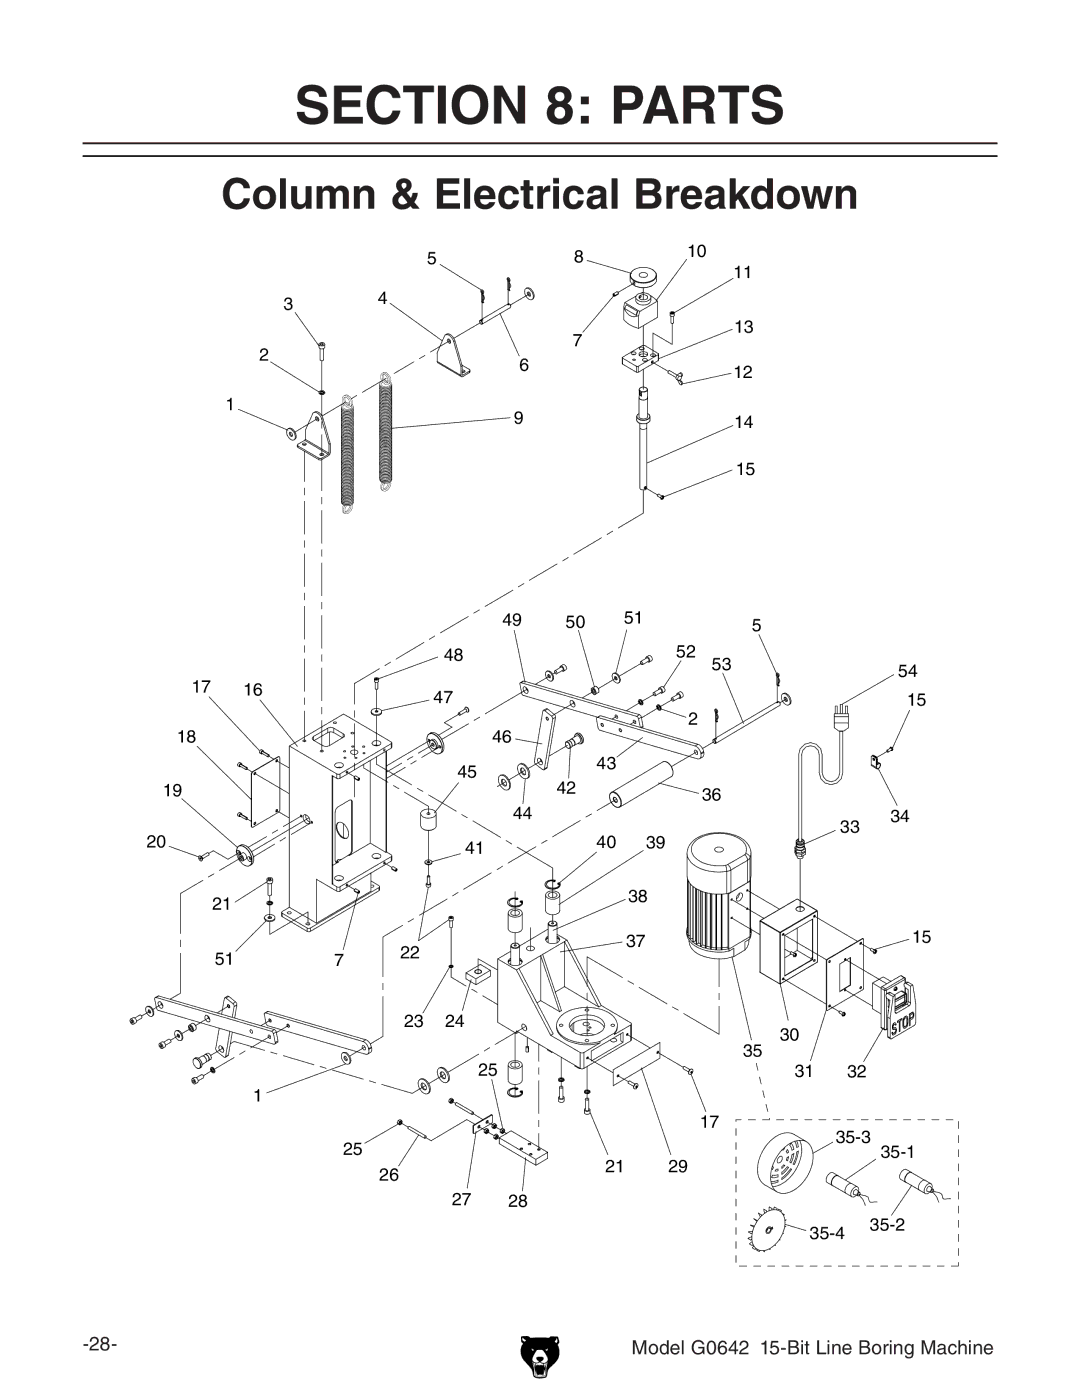 Grizzly G0642 manual Parts, Column & Electrical Breakdown 